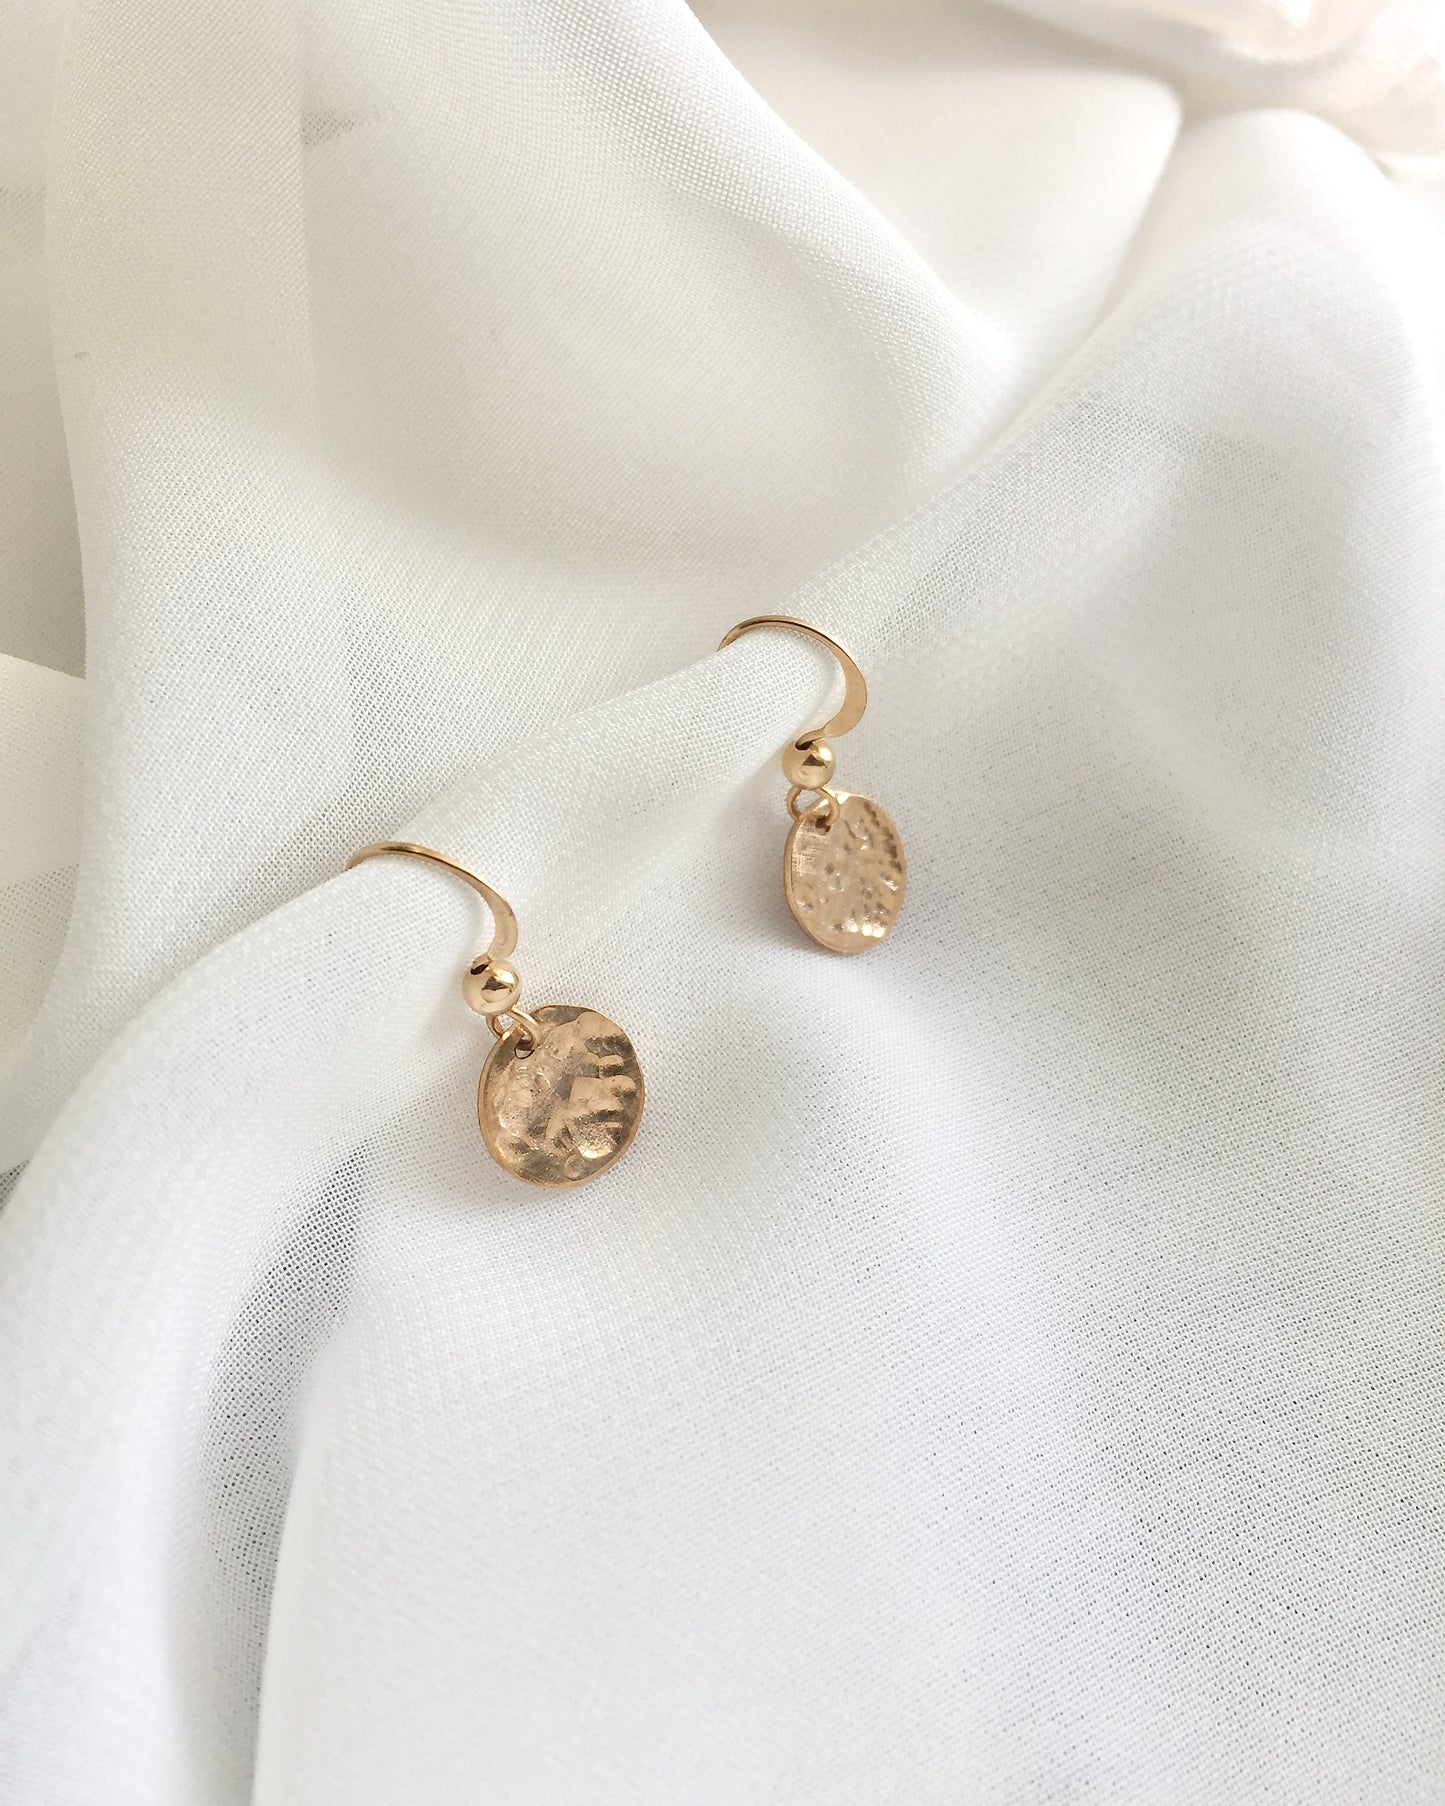 Small Hammered Disc Earrings in Gold Filled or Sterling Silver | Delicate Drop Earrings | IB Jewelry